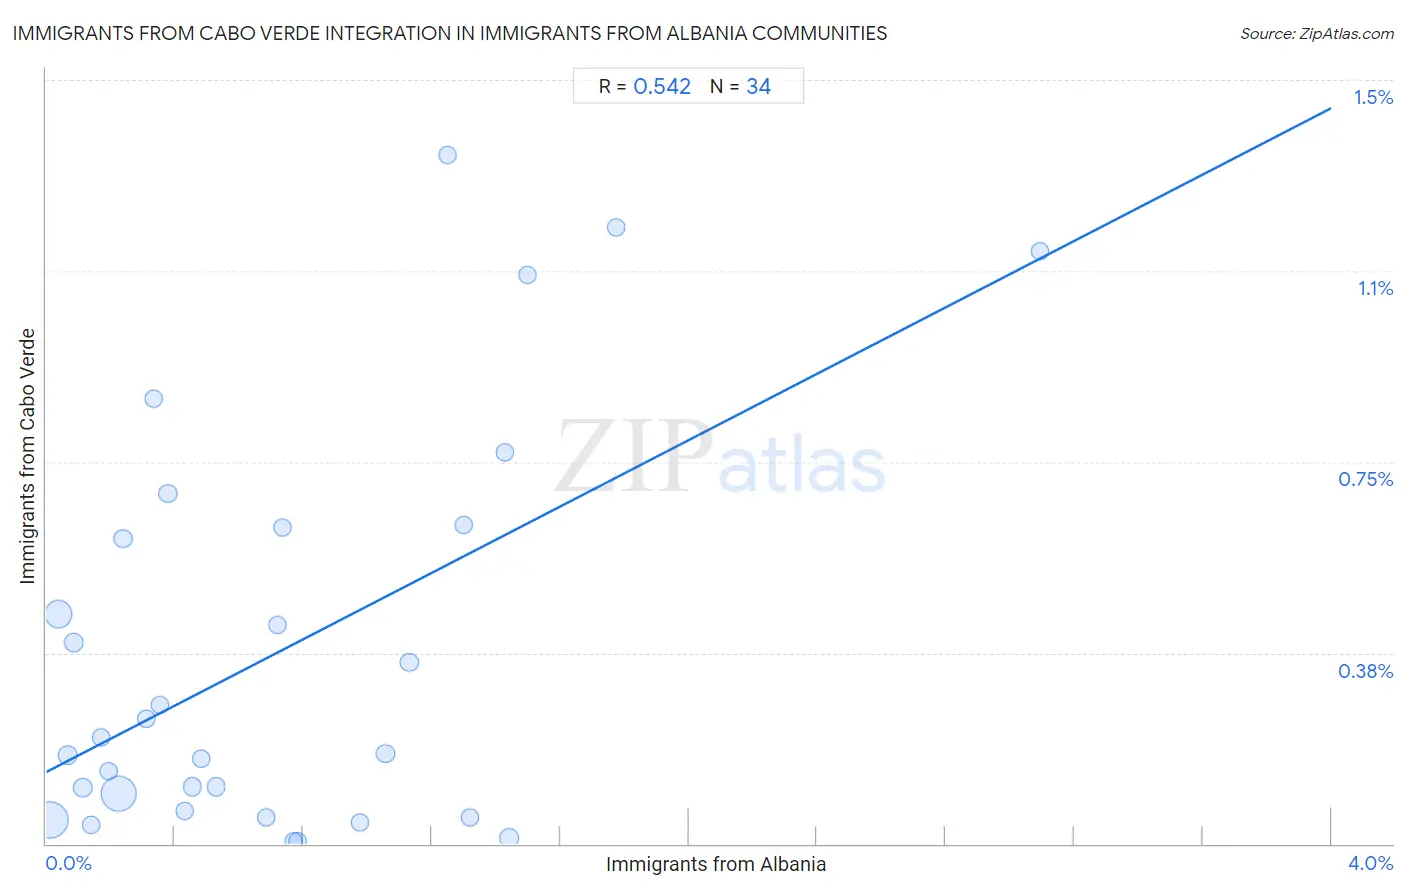 Immigrants from Albania Integration in Immigrants from Cabo Verde Communities